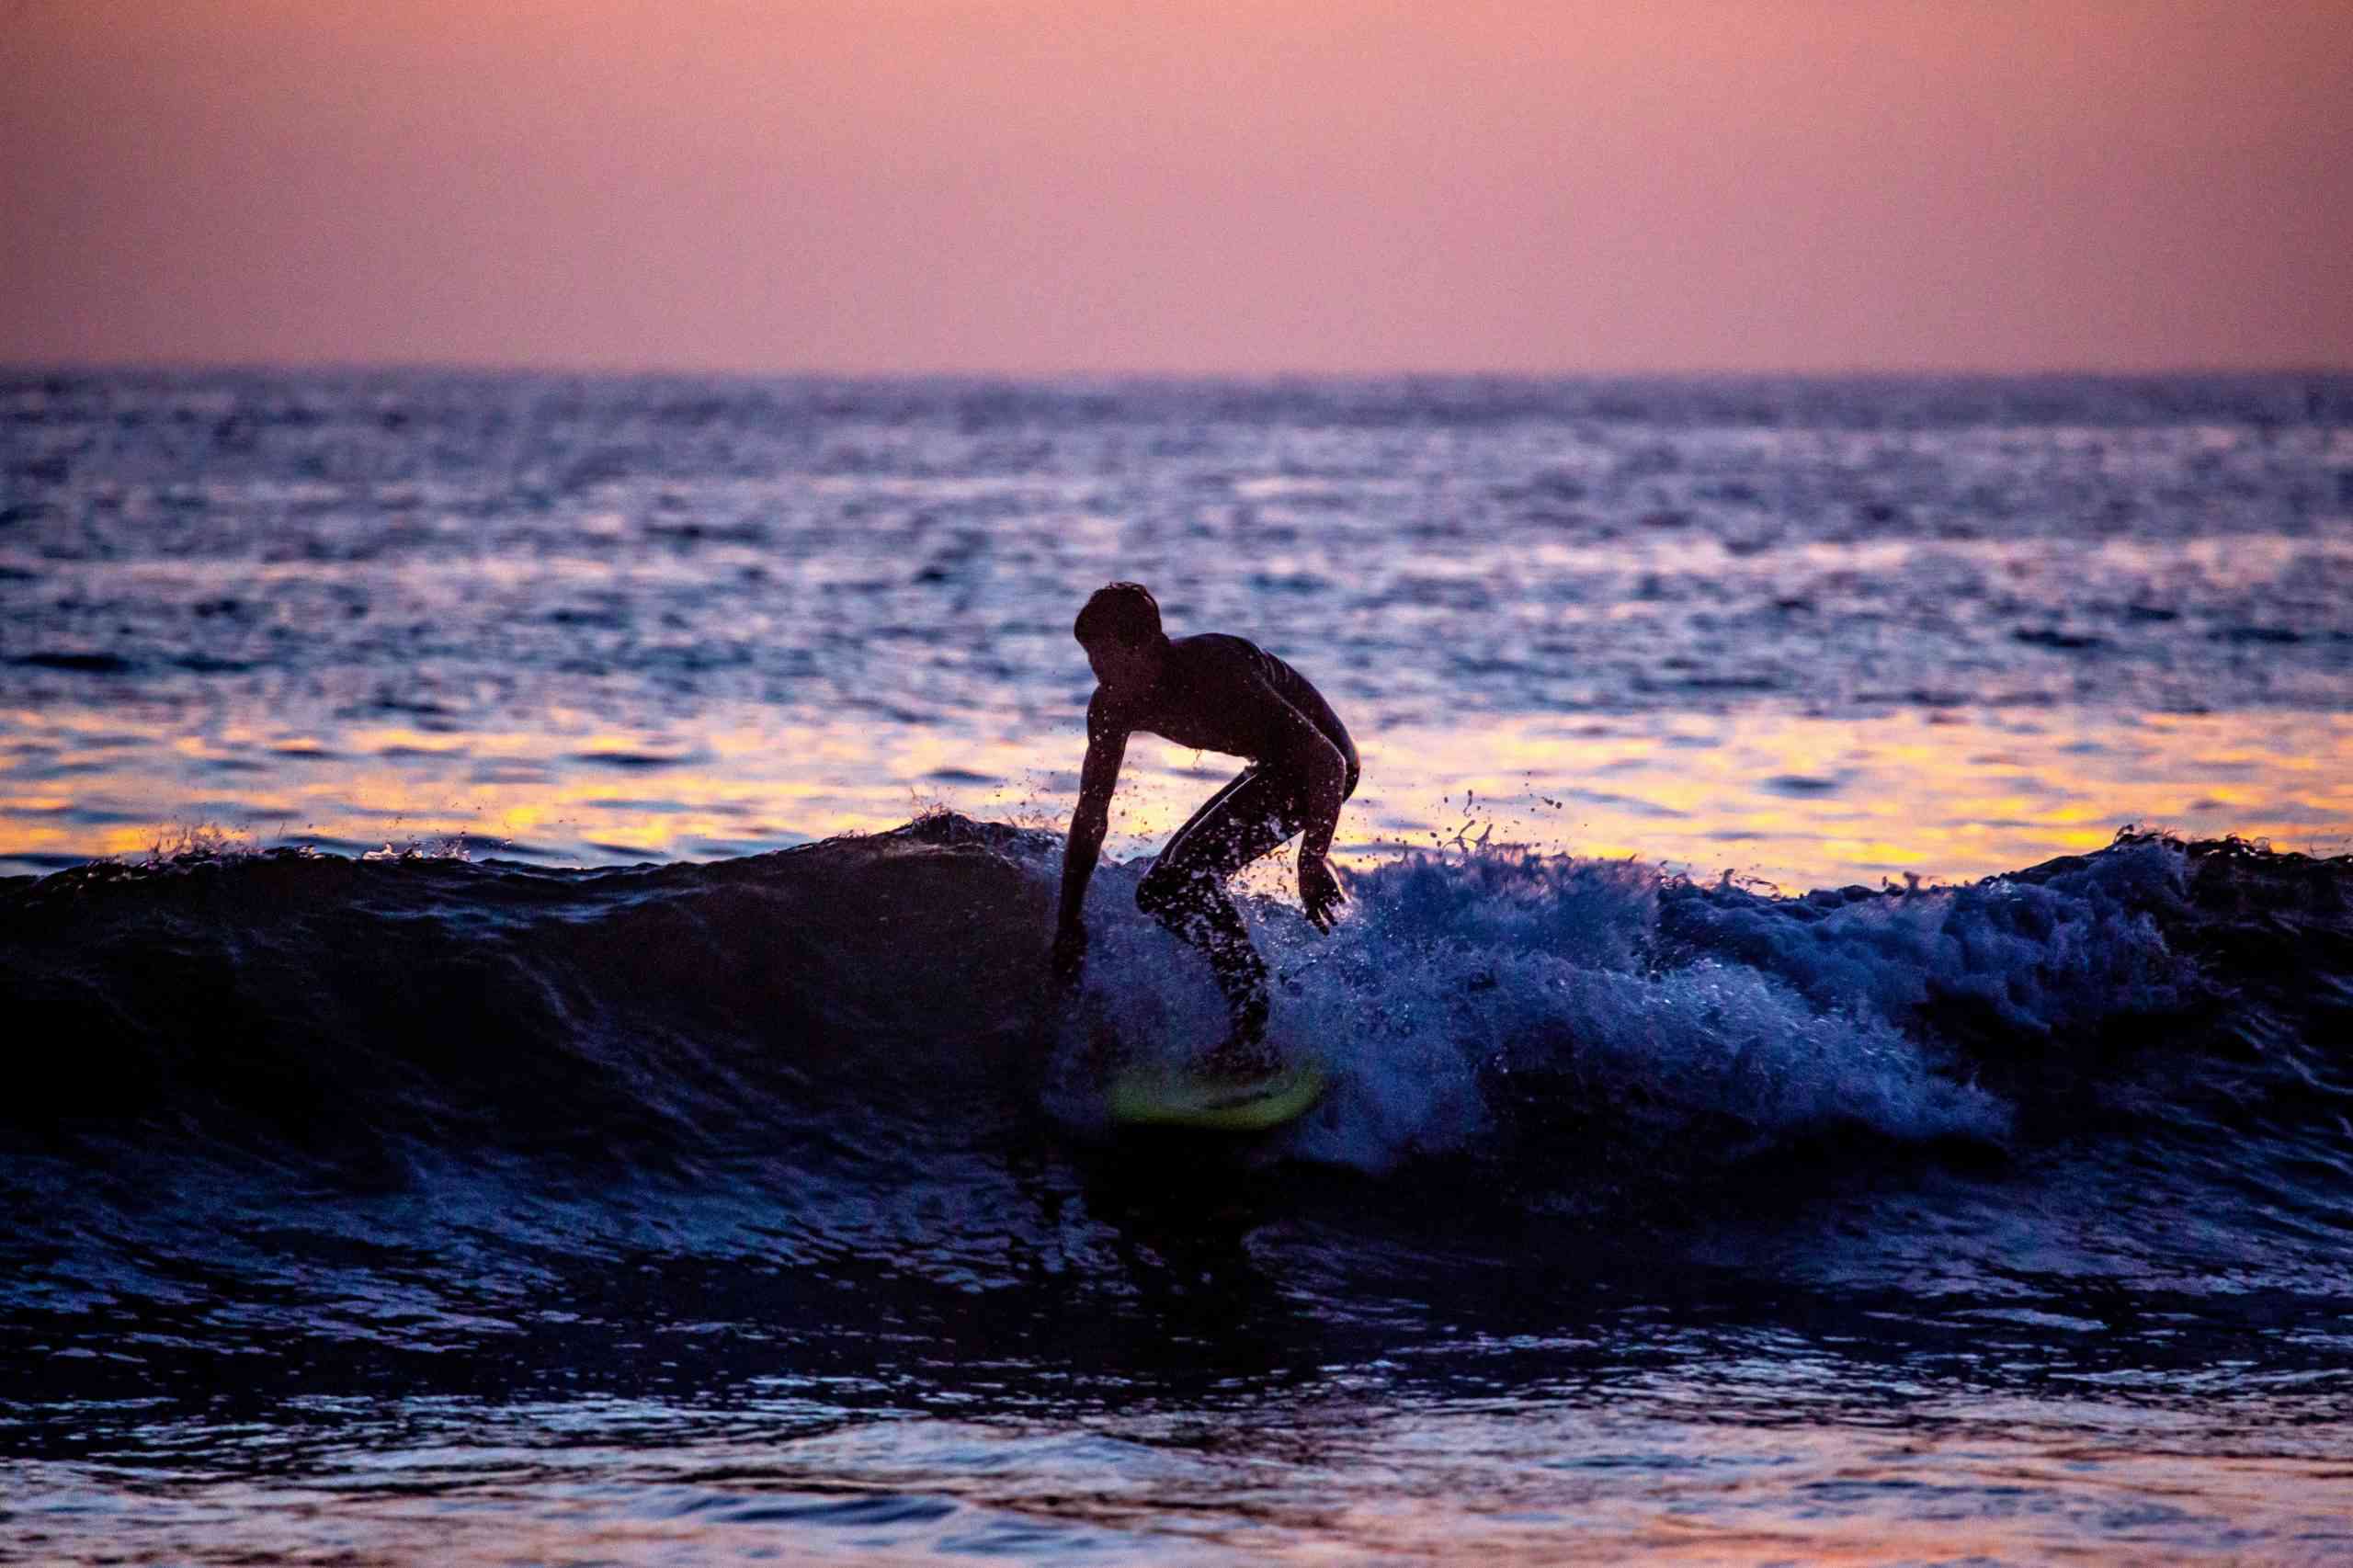 Surf with the sunset